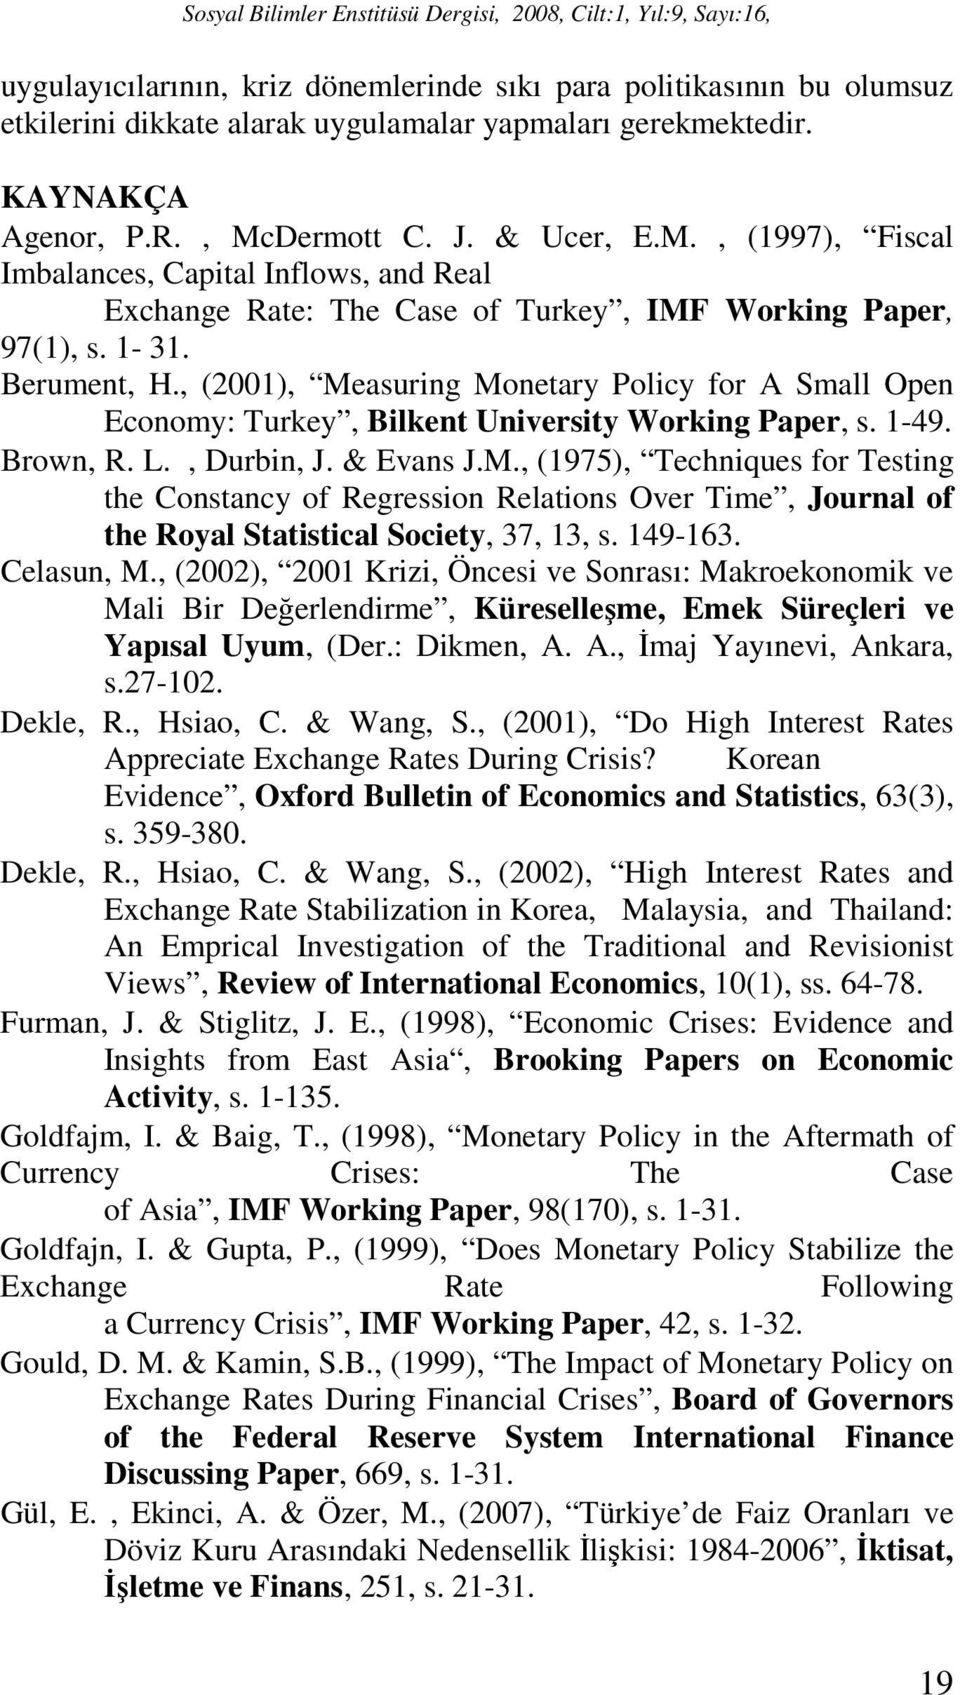 , (200), Measuring Monetary Policy for A Small Open Economy: Turkey, Bilkent University Working Paper, s. -49. Brown, R. L., Durbin, J. & Evans J.M., (975), Techniques for Testing the Constancy of Regression Relations Over Time, Journal of the Royal Statistical Society, 37, 3, s.